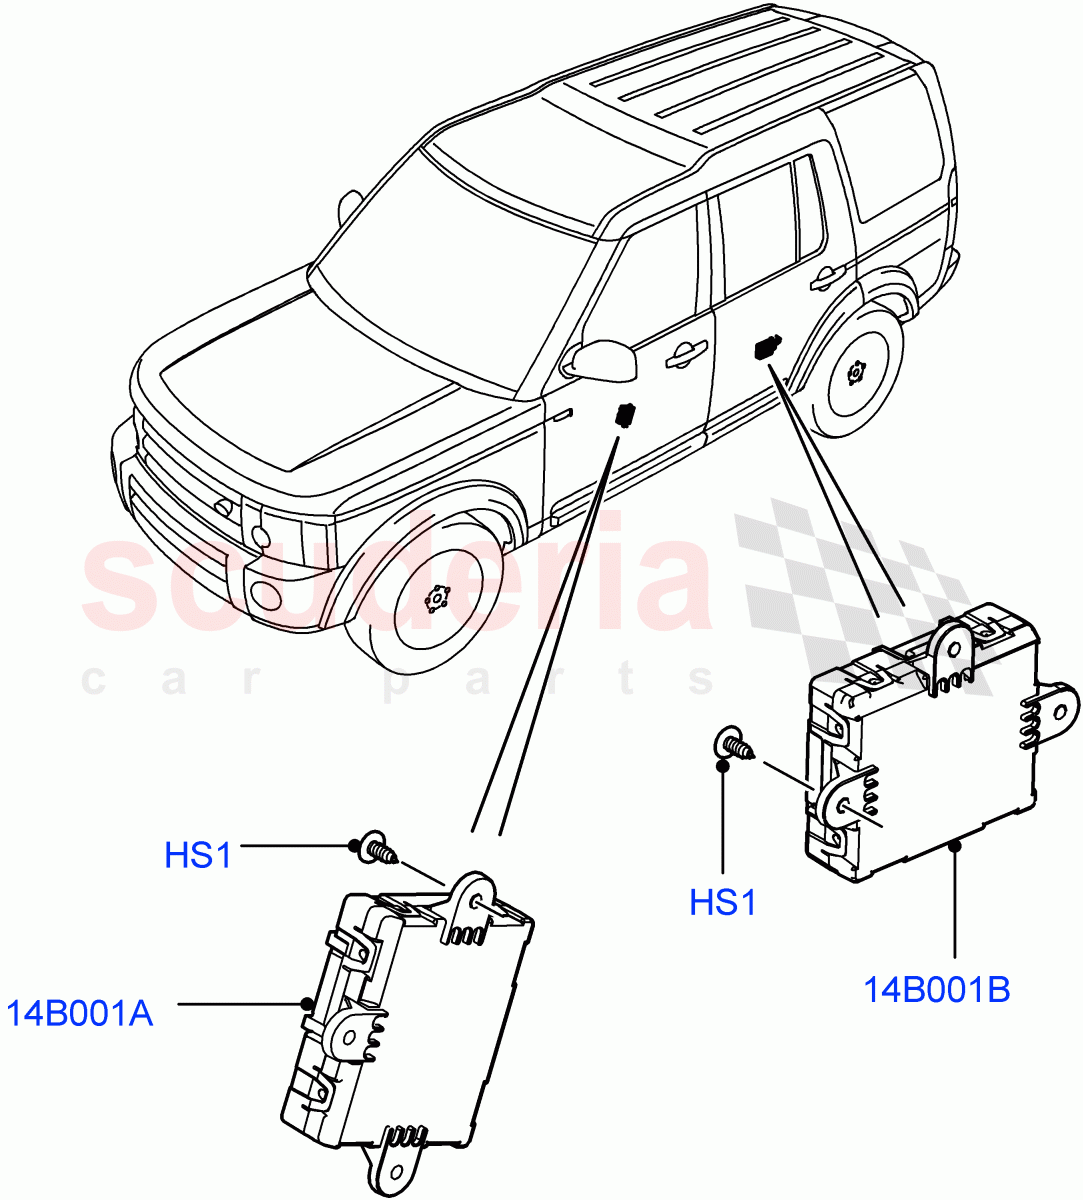 Vehicle Modules And Sensors(Door)((V)FROMAA000001) of Land Rover Land Rover Discovery 4 (2010-2016) [4.0 Petrol V6]